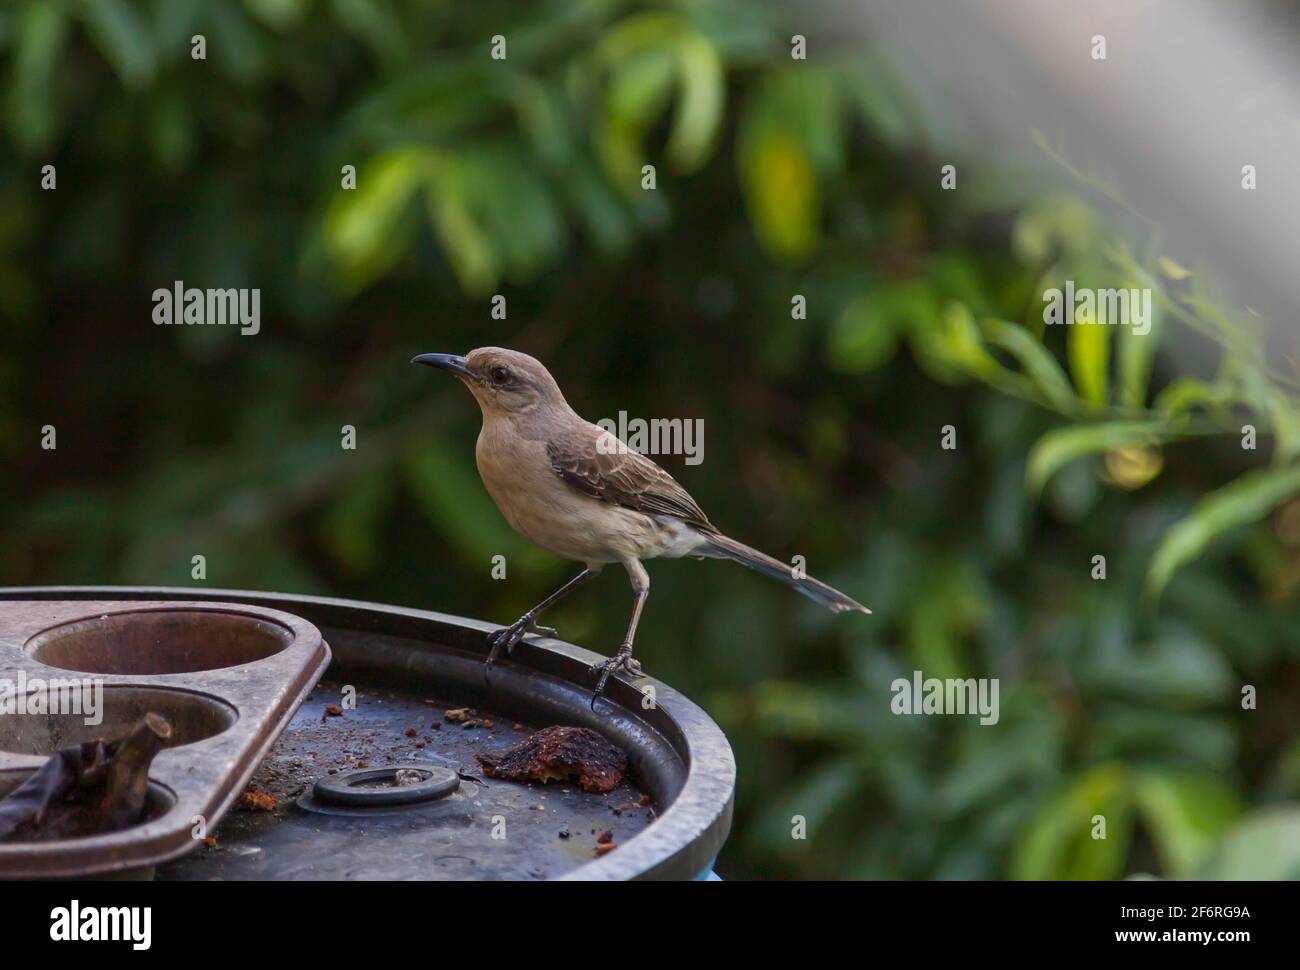 Tropical mocking bird on the edge of a container Stock Photo